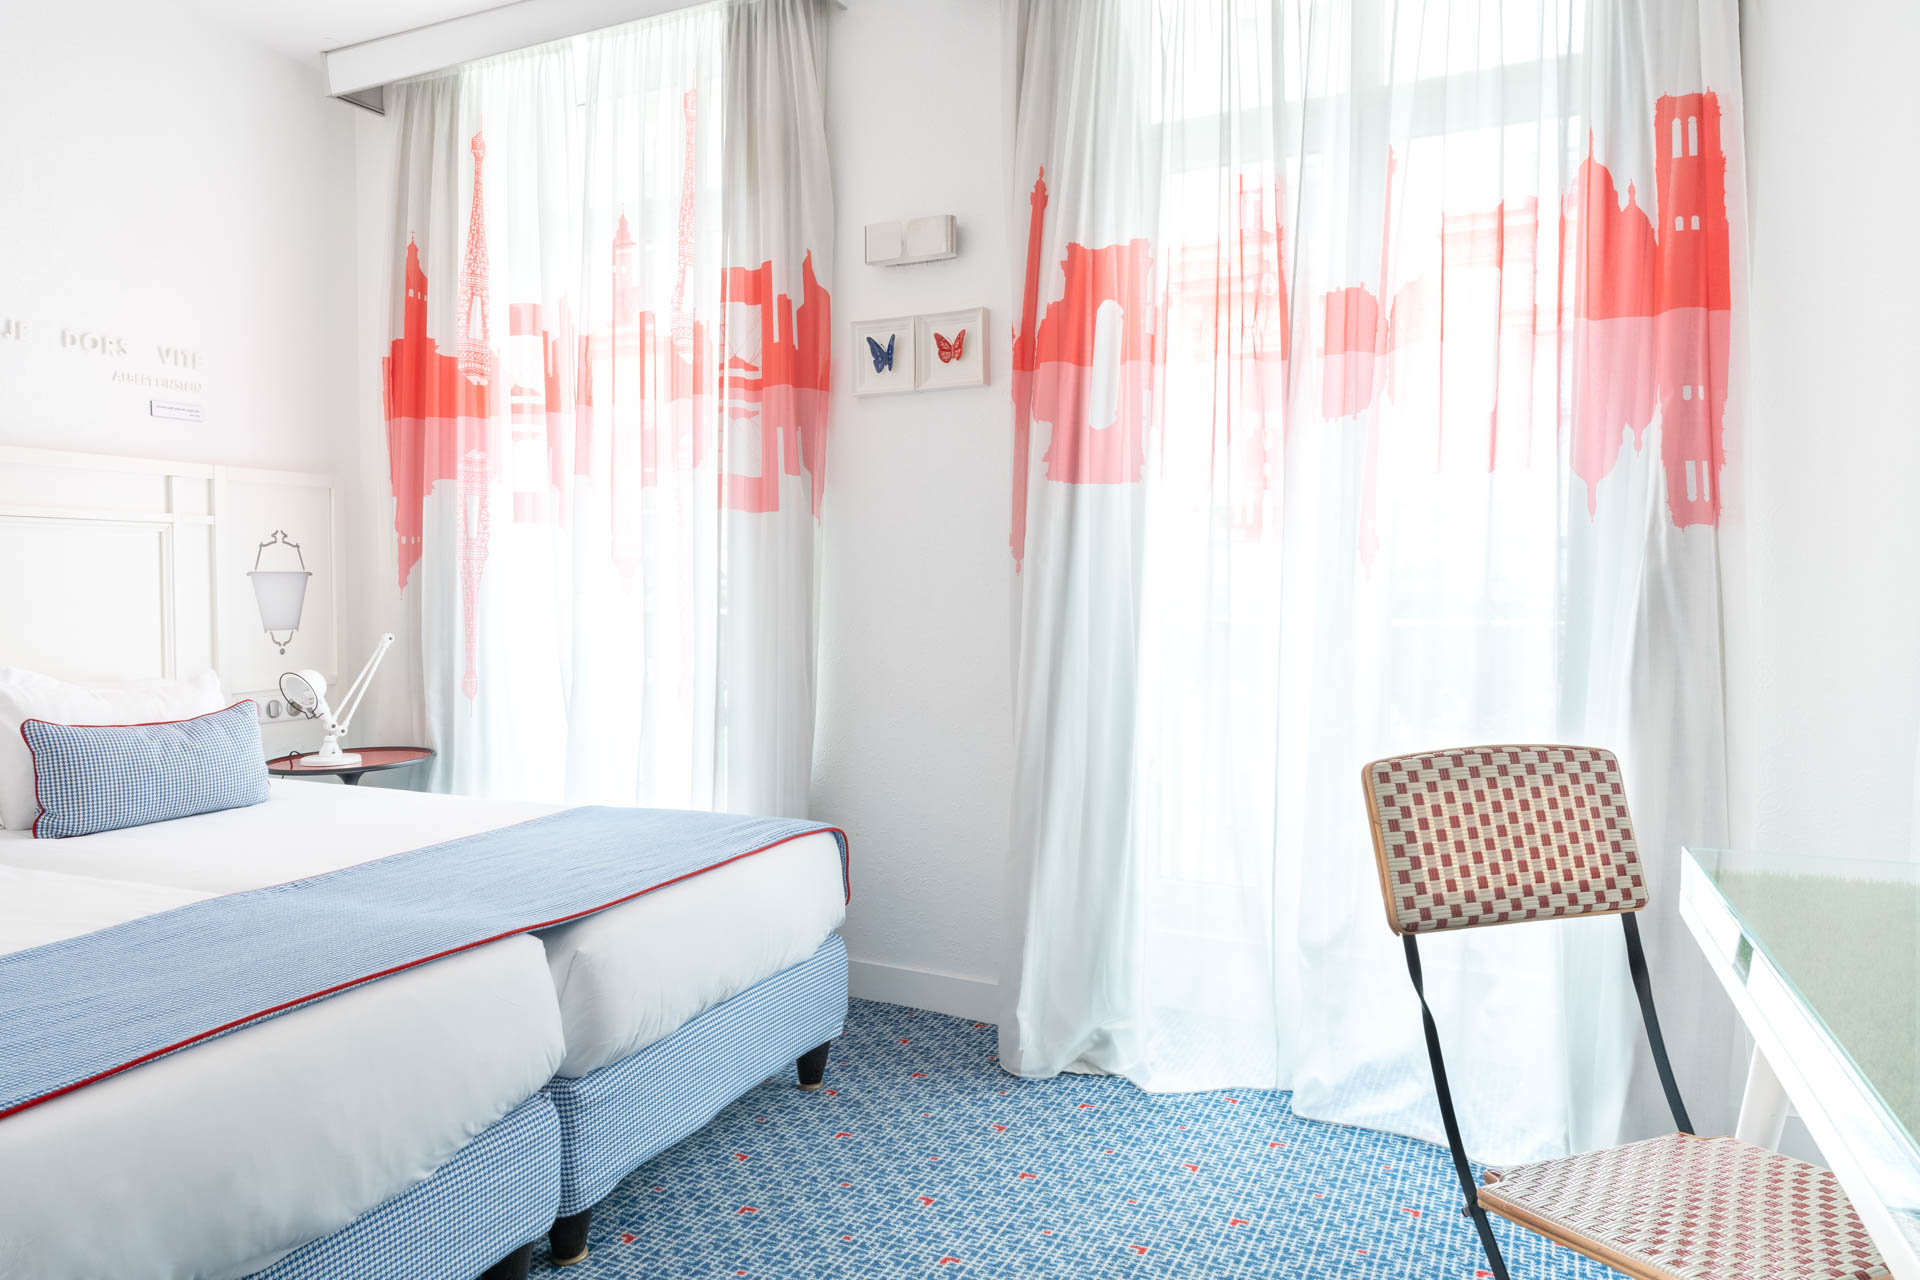 Rooms paying tribute to France - Hotel 34B, Astotel